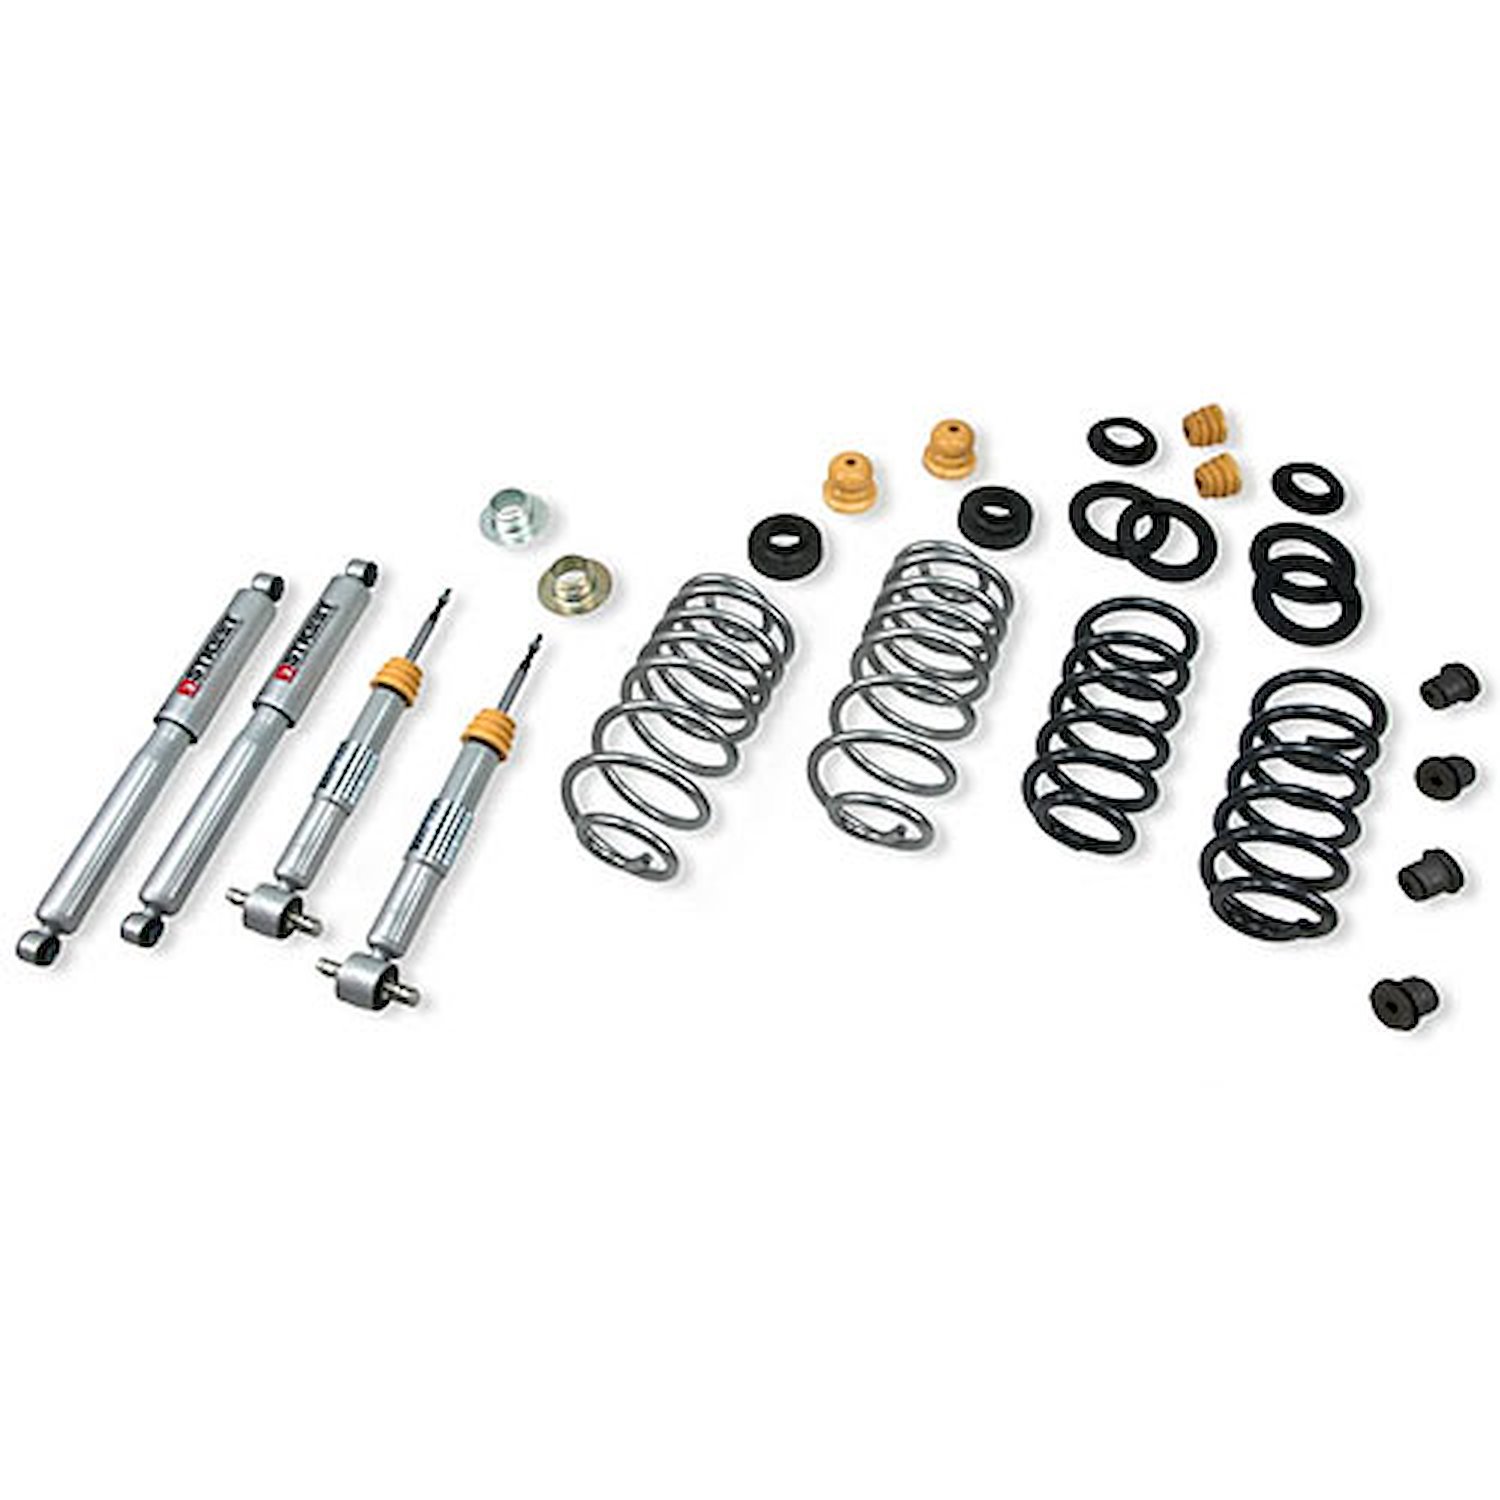 Complete Lowering Kit 2015-Up Chevy Tahoe/GMC Yukon/CAdillac Escalade w/o Factory Autoride/Magnetic Ride